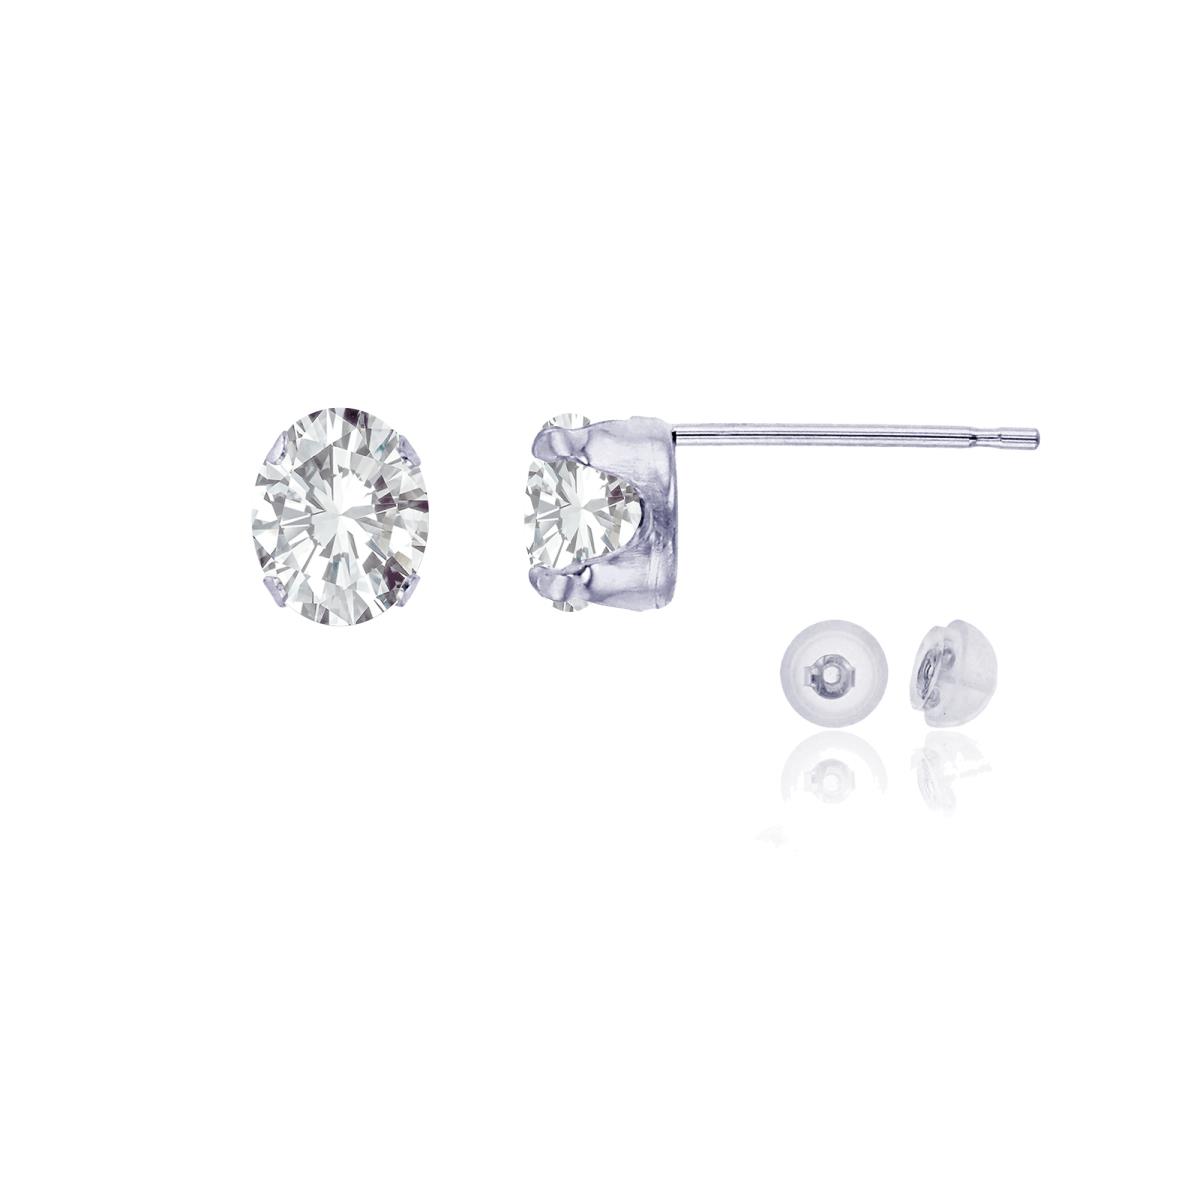 14K White Gold 6x4mm Oval White Topaz Stud Earring with Silicone Back